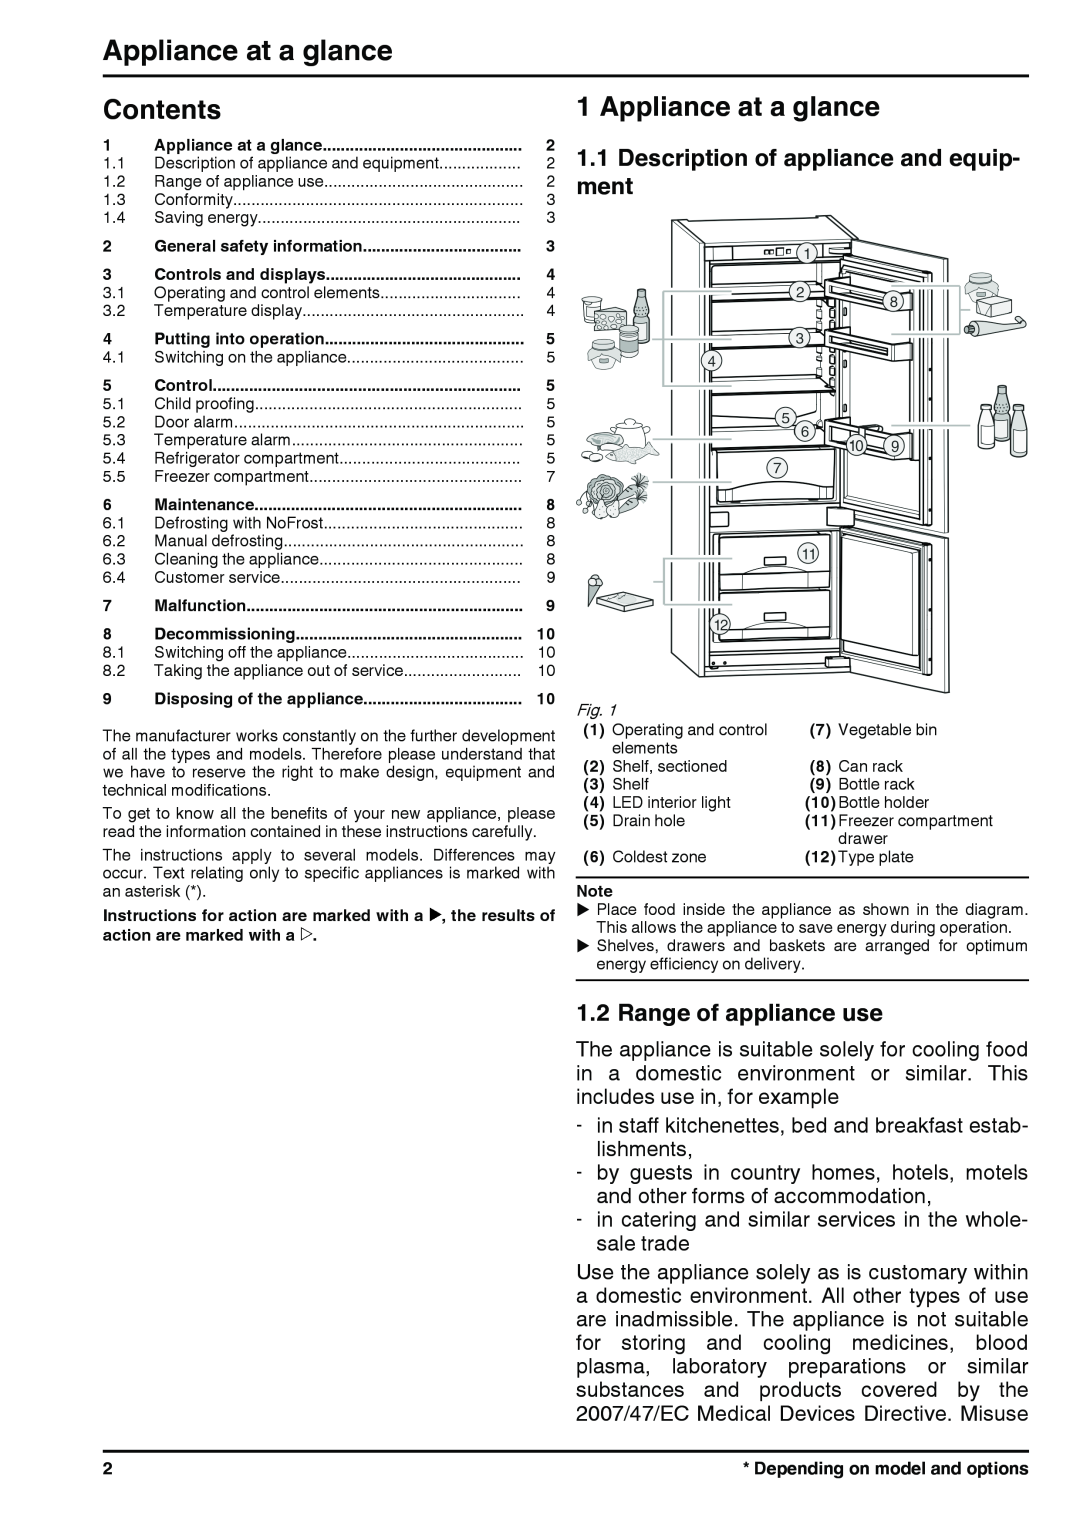 Liebherr 7085446-01 Appliance at a glance, Contents, Description of appliance and equip, ment, Range of appliance use 